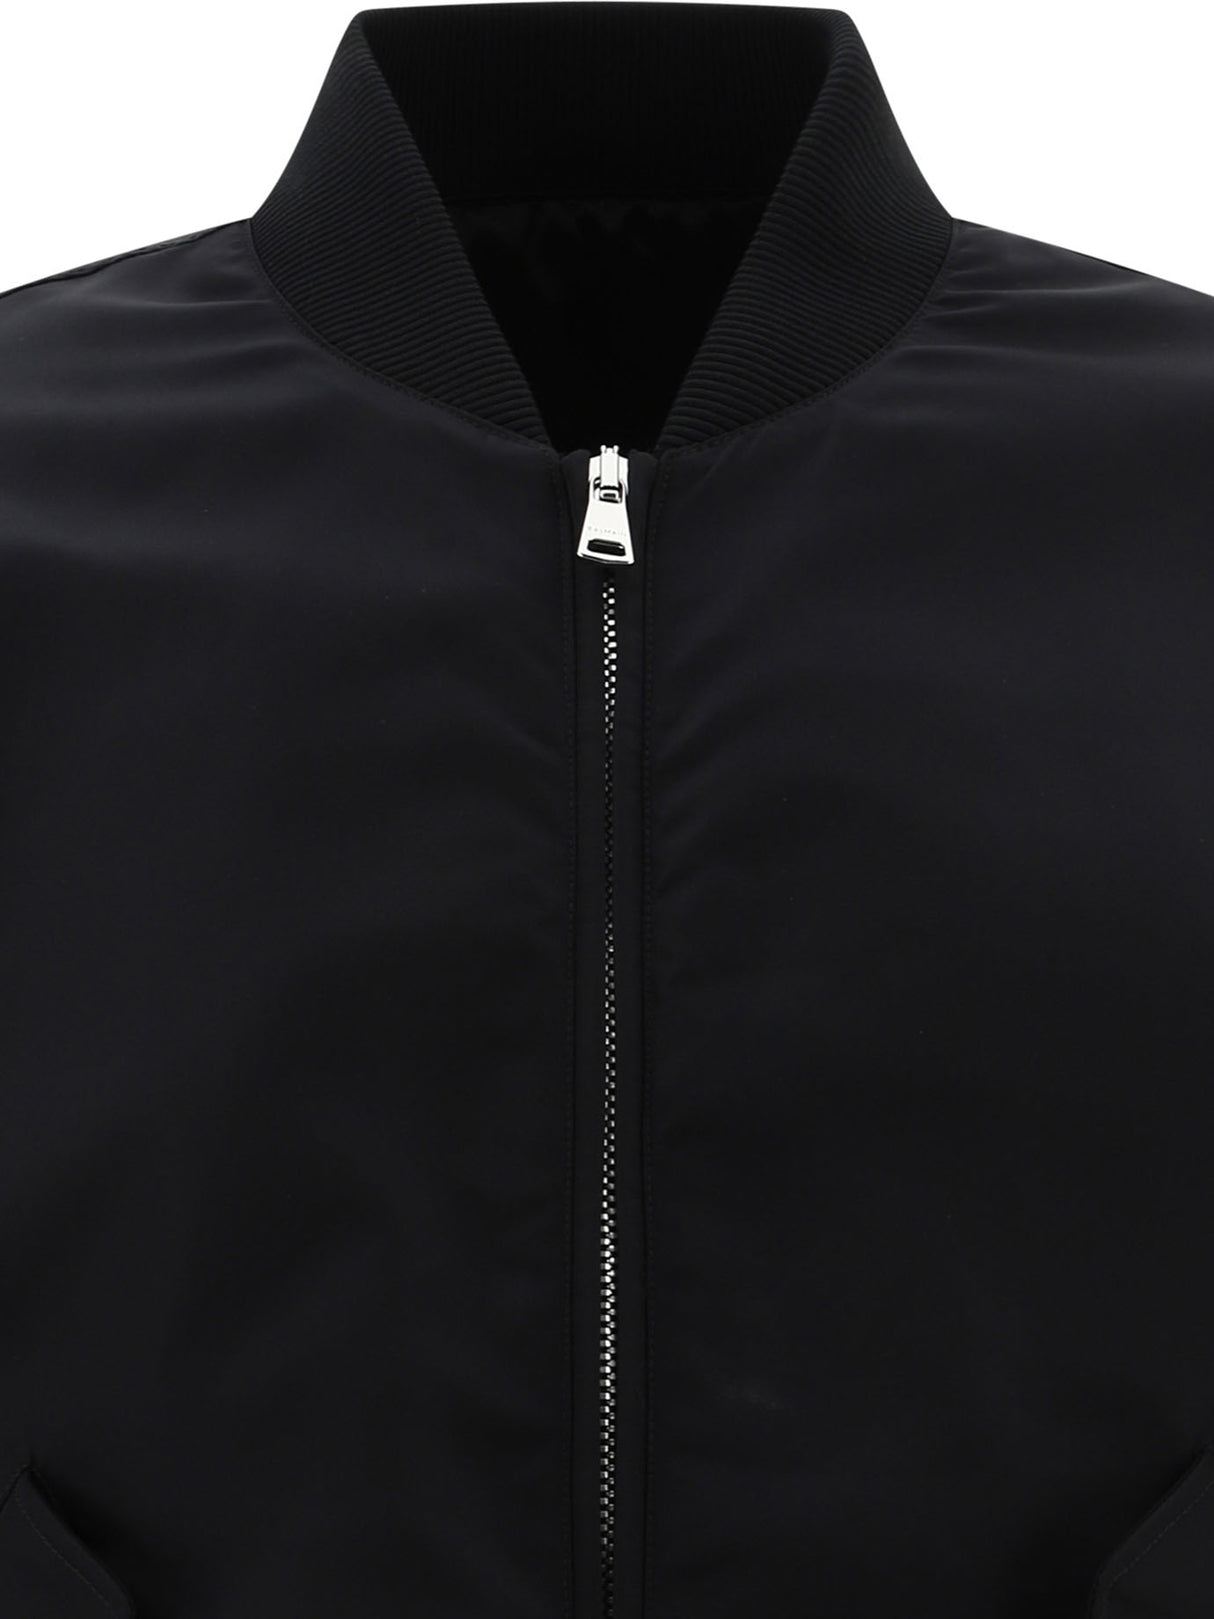 BOMBER JACKET WITH BALMAIN SIGNATURE Embroidered ON THE BACK